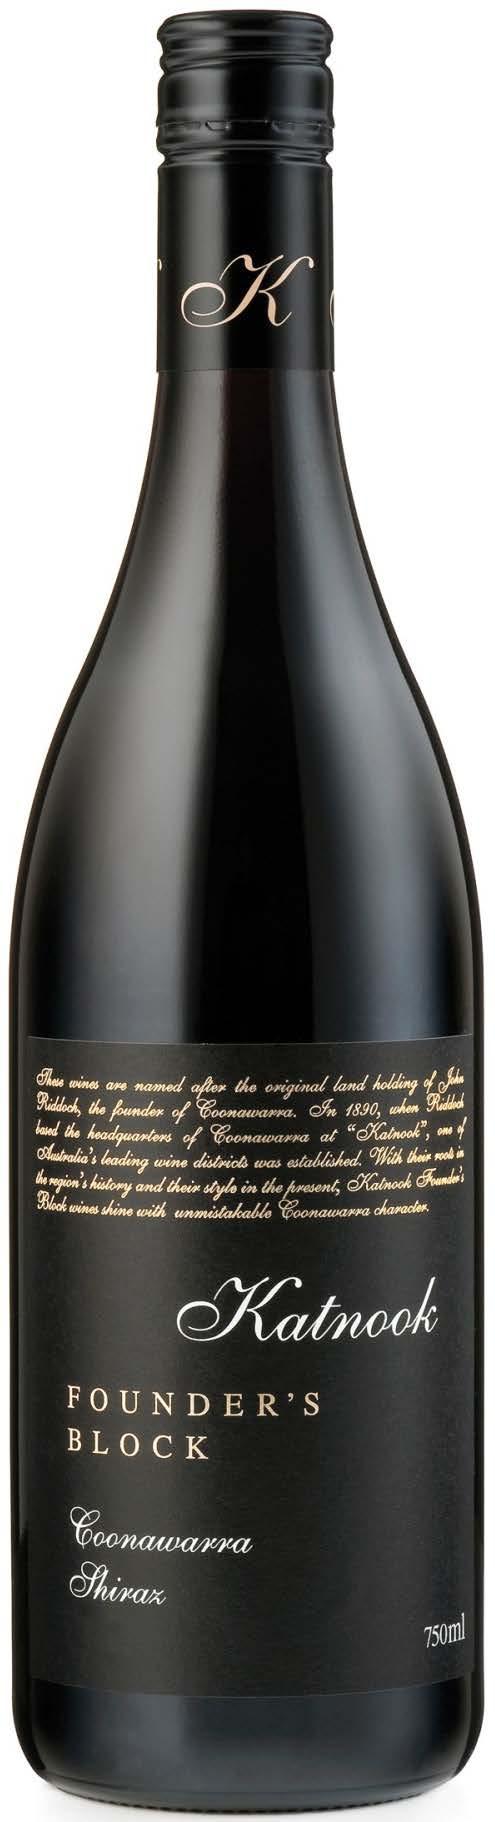 Katnook Founder s Block Shiraz 2011 With Katnook Estate pedigree, the Founder s Block range is styled for everyday drinking, inviting a modern generation of wine consumers to enjoy the pleasures of